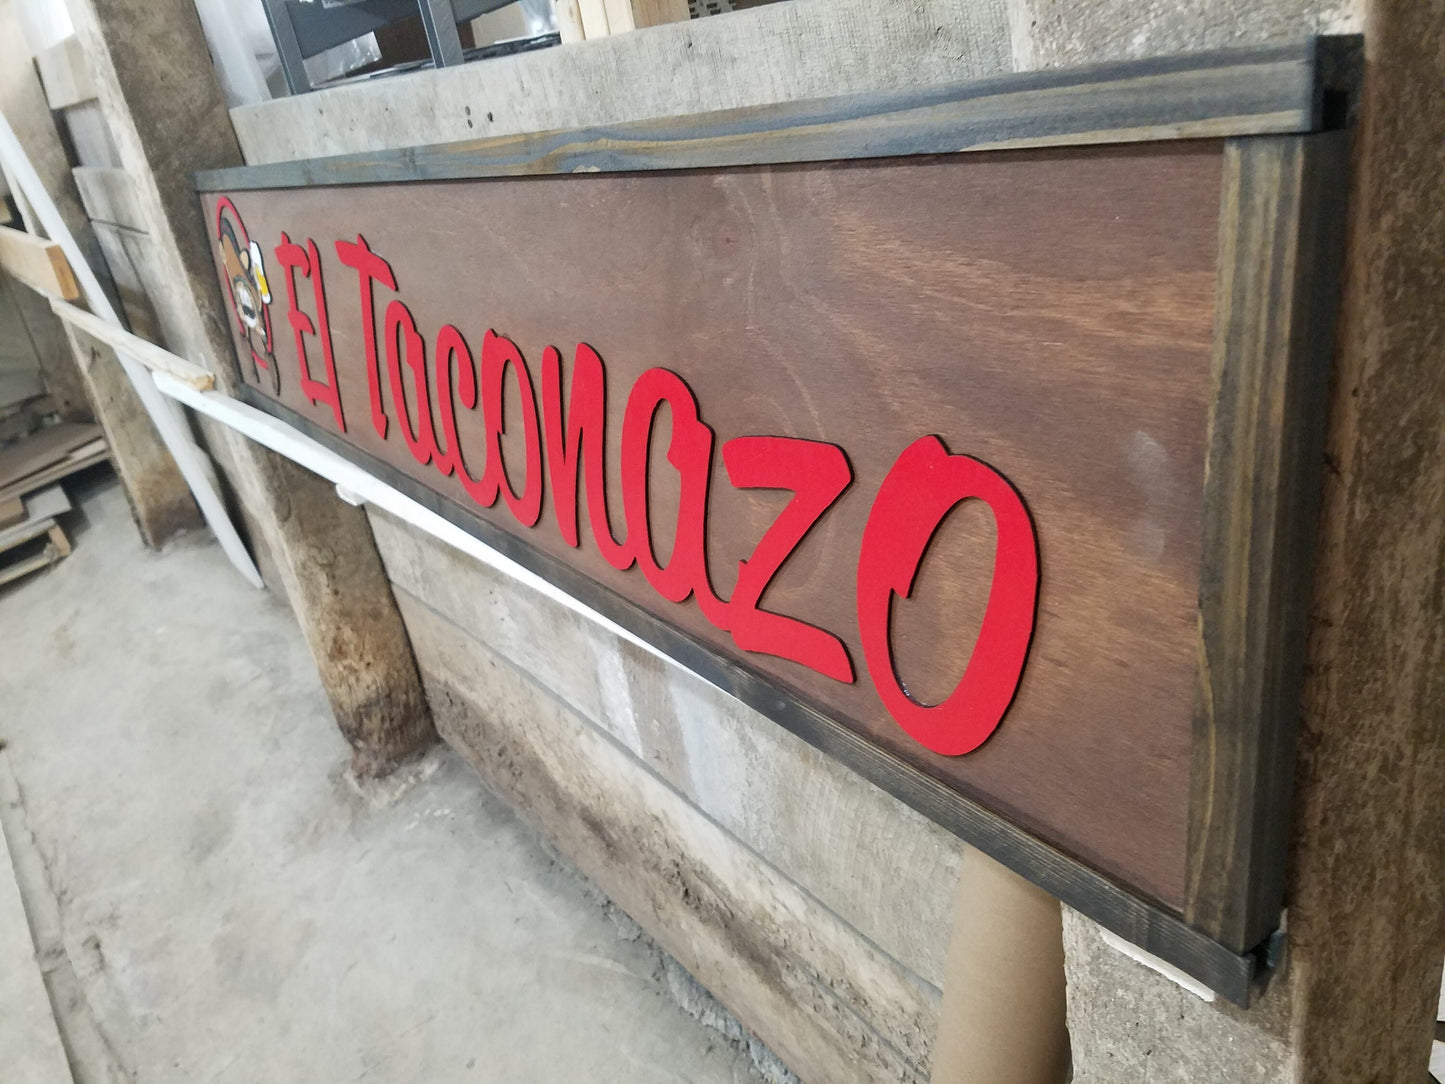 Restaurant Wood Sign Large Custom Business Sign, Taco, Restaurant, Over-sized Rustic Business Logo, Wood, Laser Cut Out, 3D, Extra Large